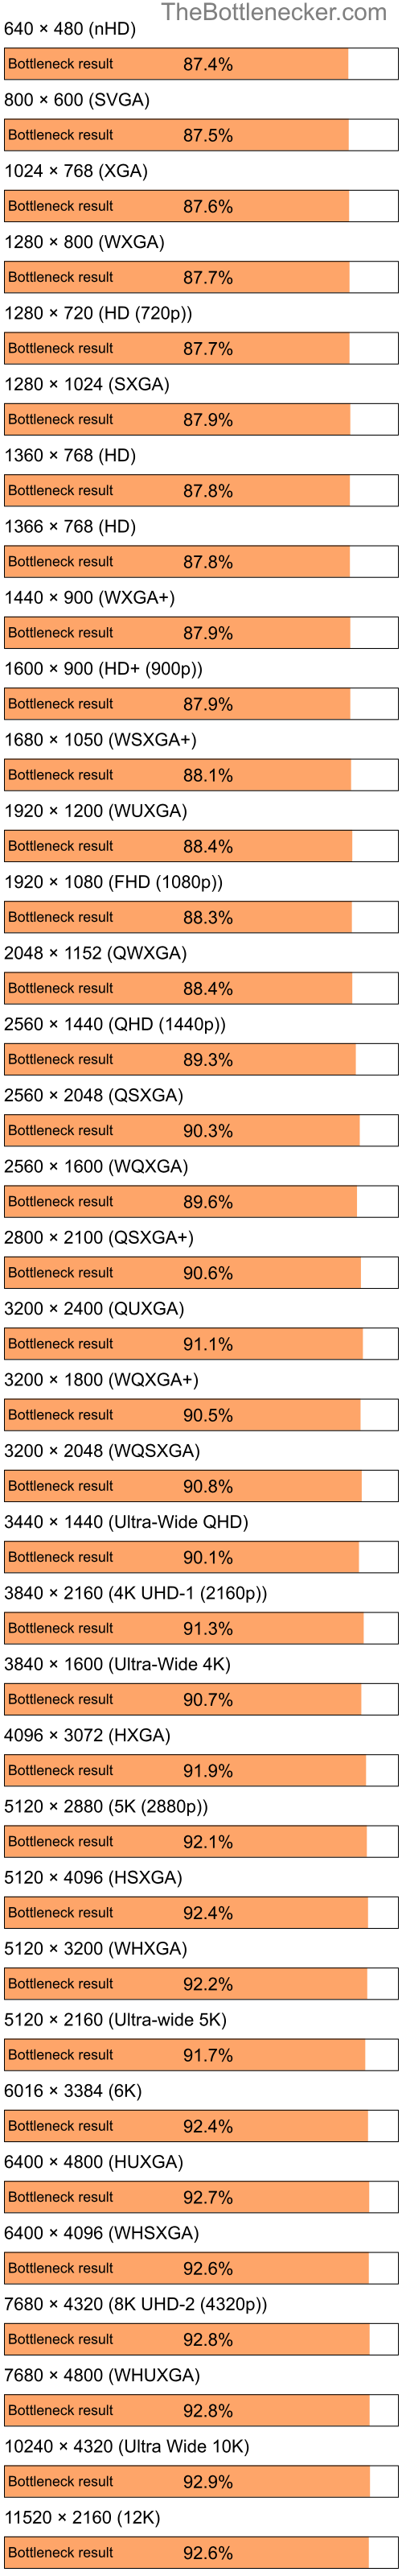 Bottleneck results by resolution for Intel Pentium 4 and NVIDIA GeForce4 MX 420 in Processor Intense Tasks